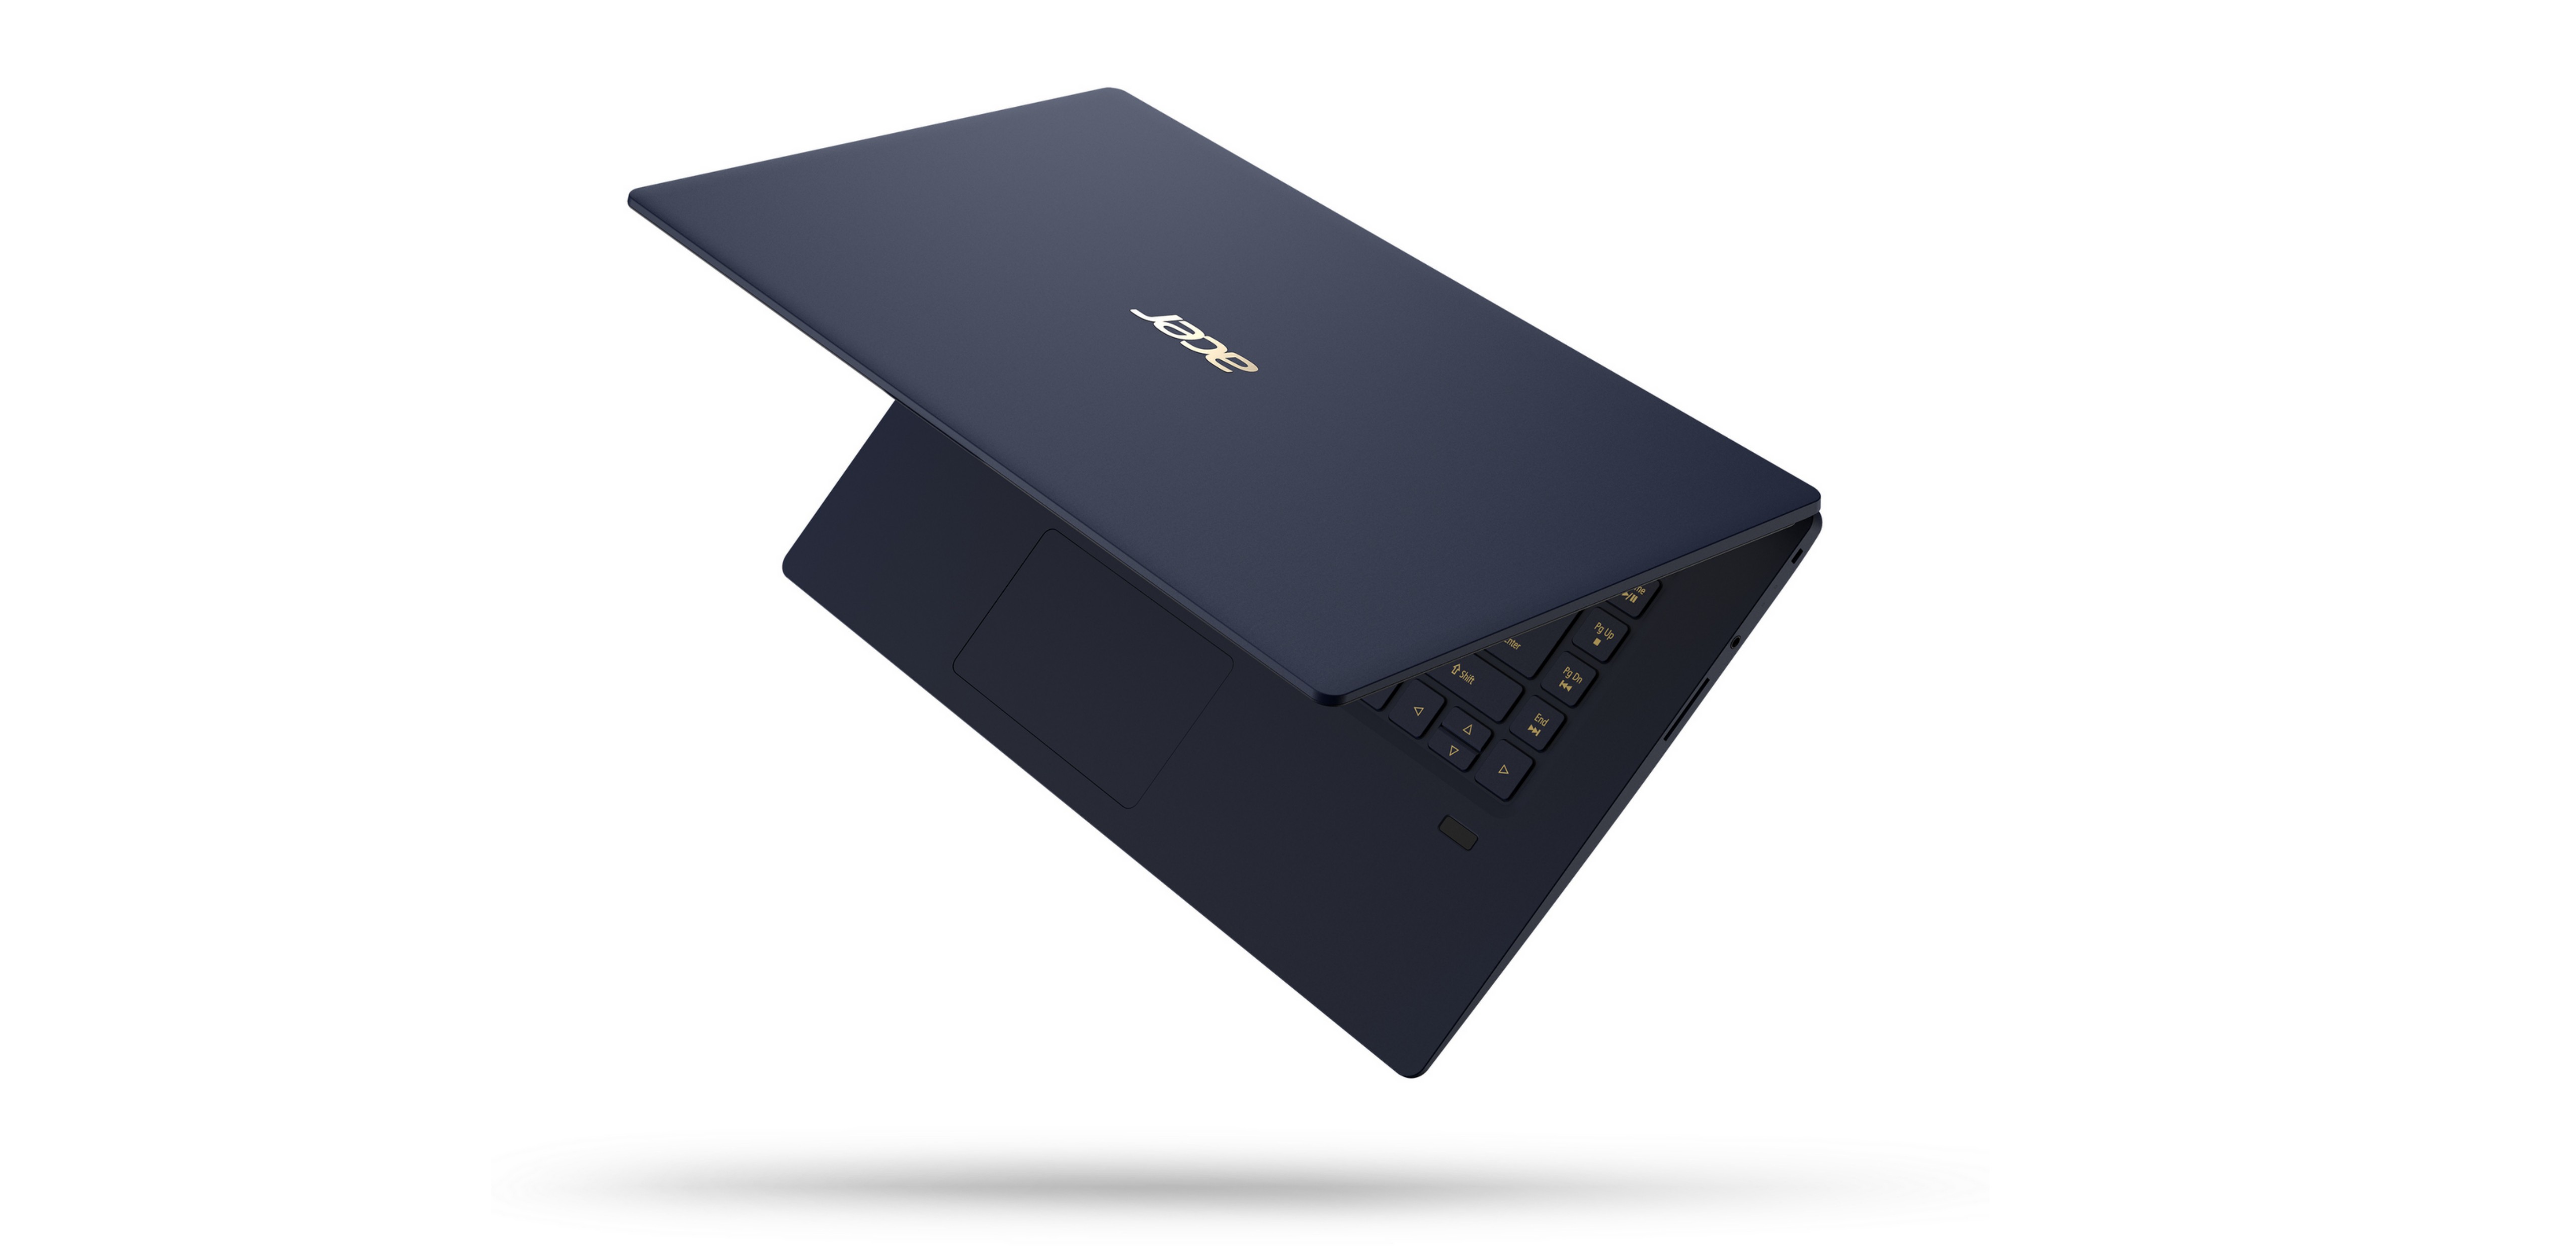 The 15-inch Swift 5 Notebook